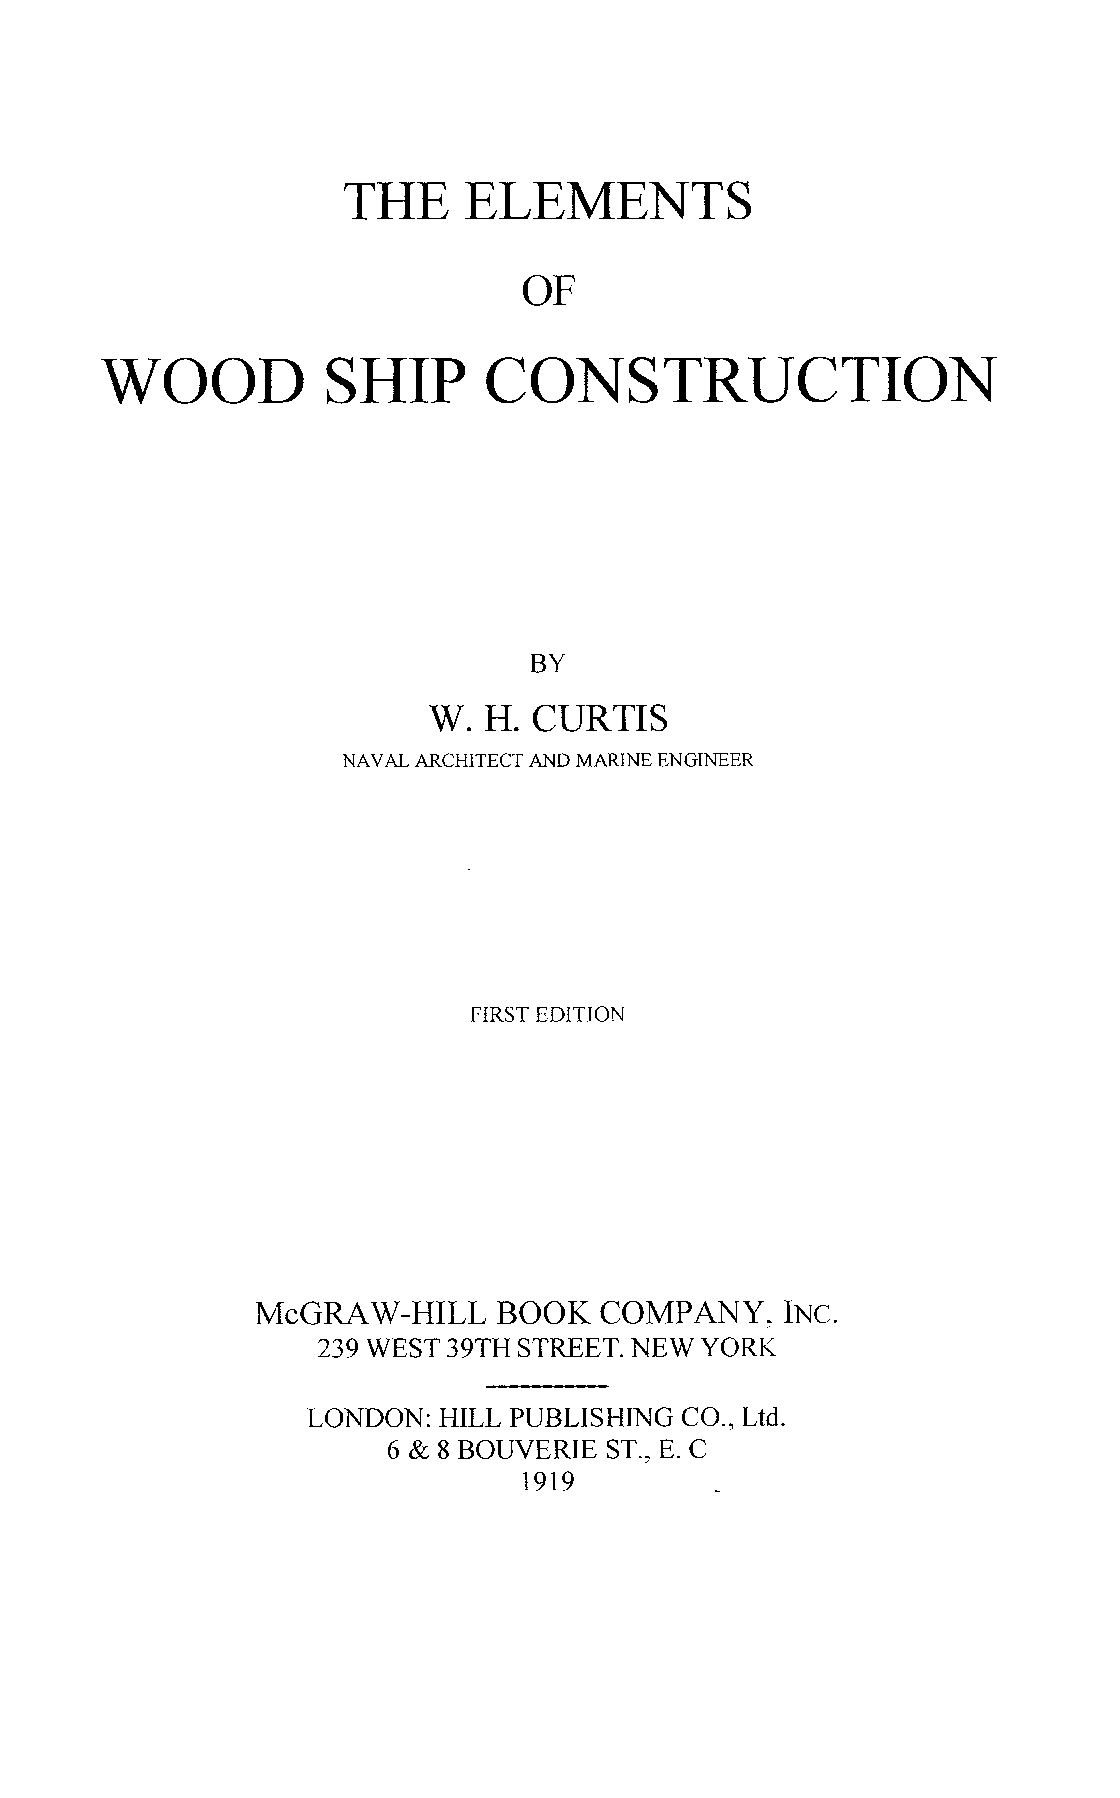 free, book, shipbuilding, elements, wood, ship, construction, w.h. curtis